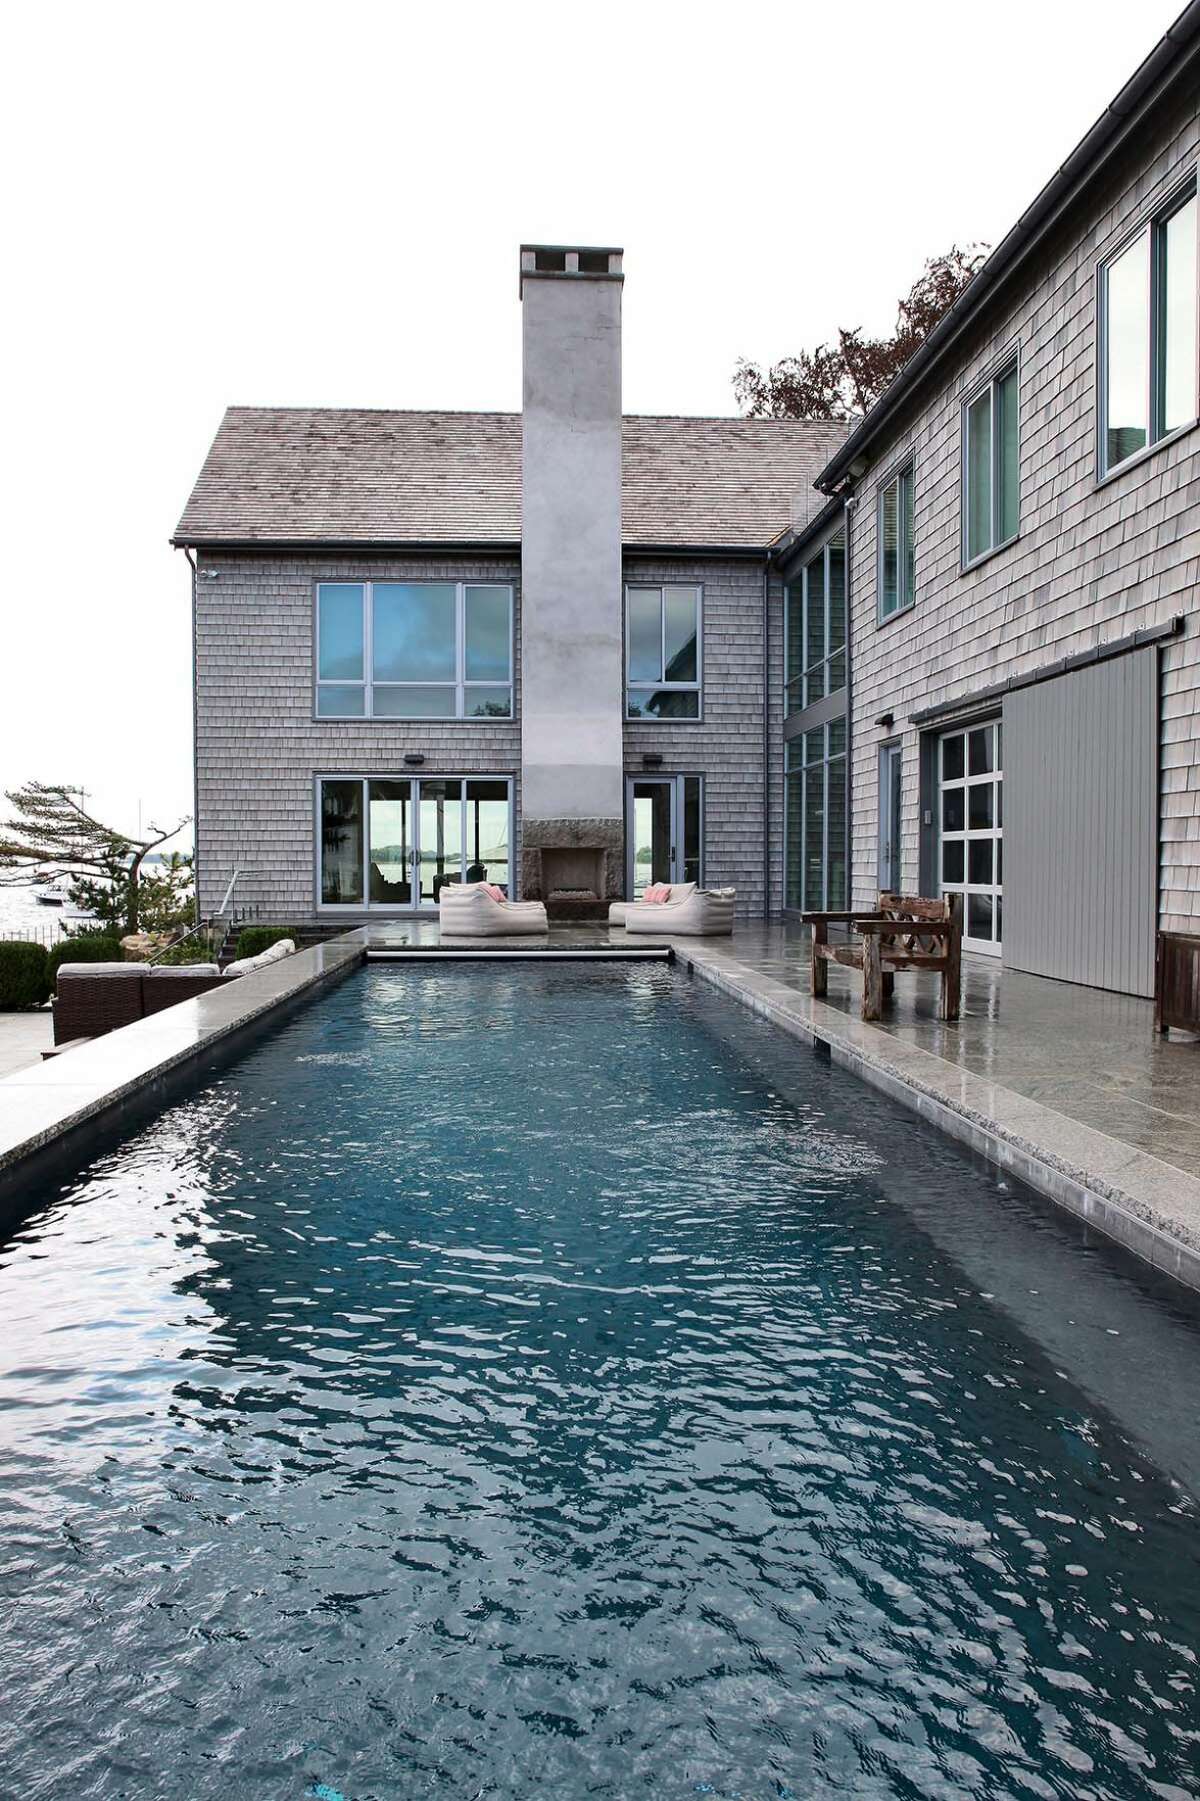 This contemporary coastal compound that sits on a peninsula along Long Island Sound in Rowayton features a spacious great room and plenty of water views through large windows. The house earned the new construction award in the 2019 Alice Washburn residential archiecture contest.